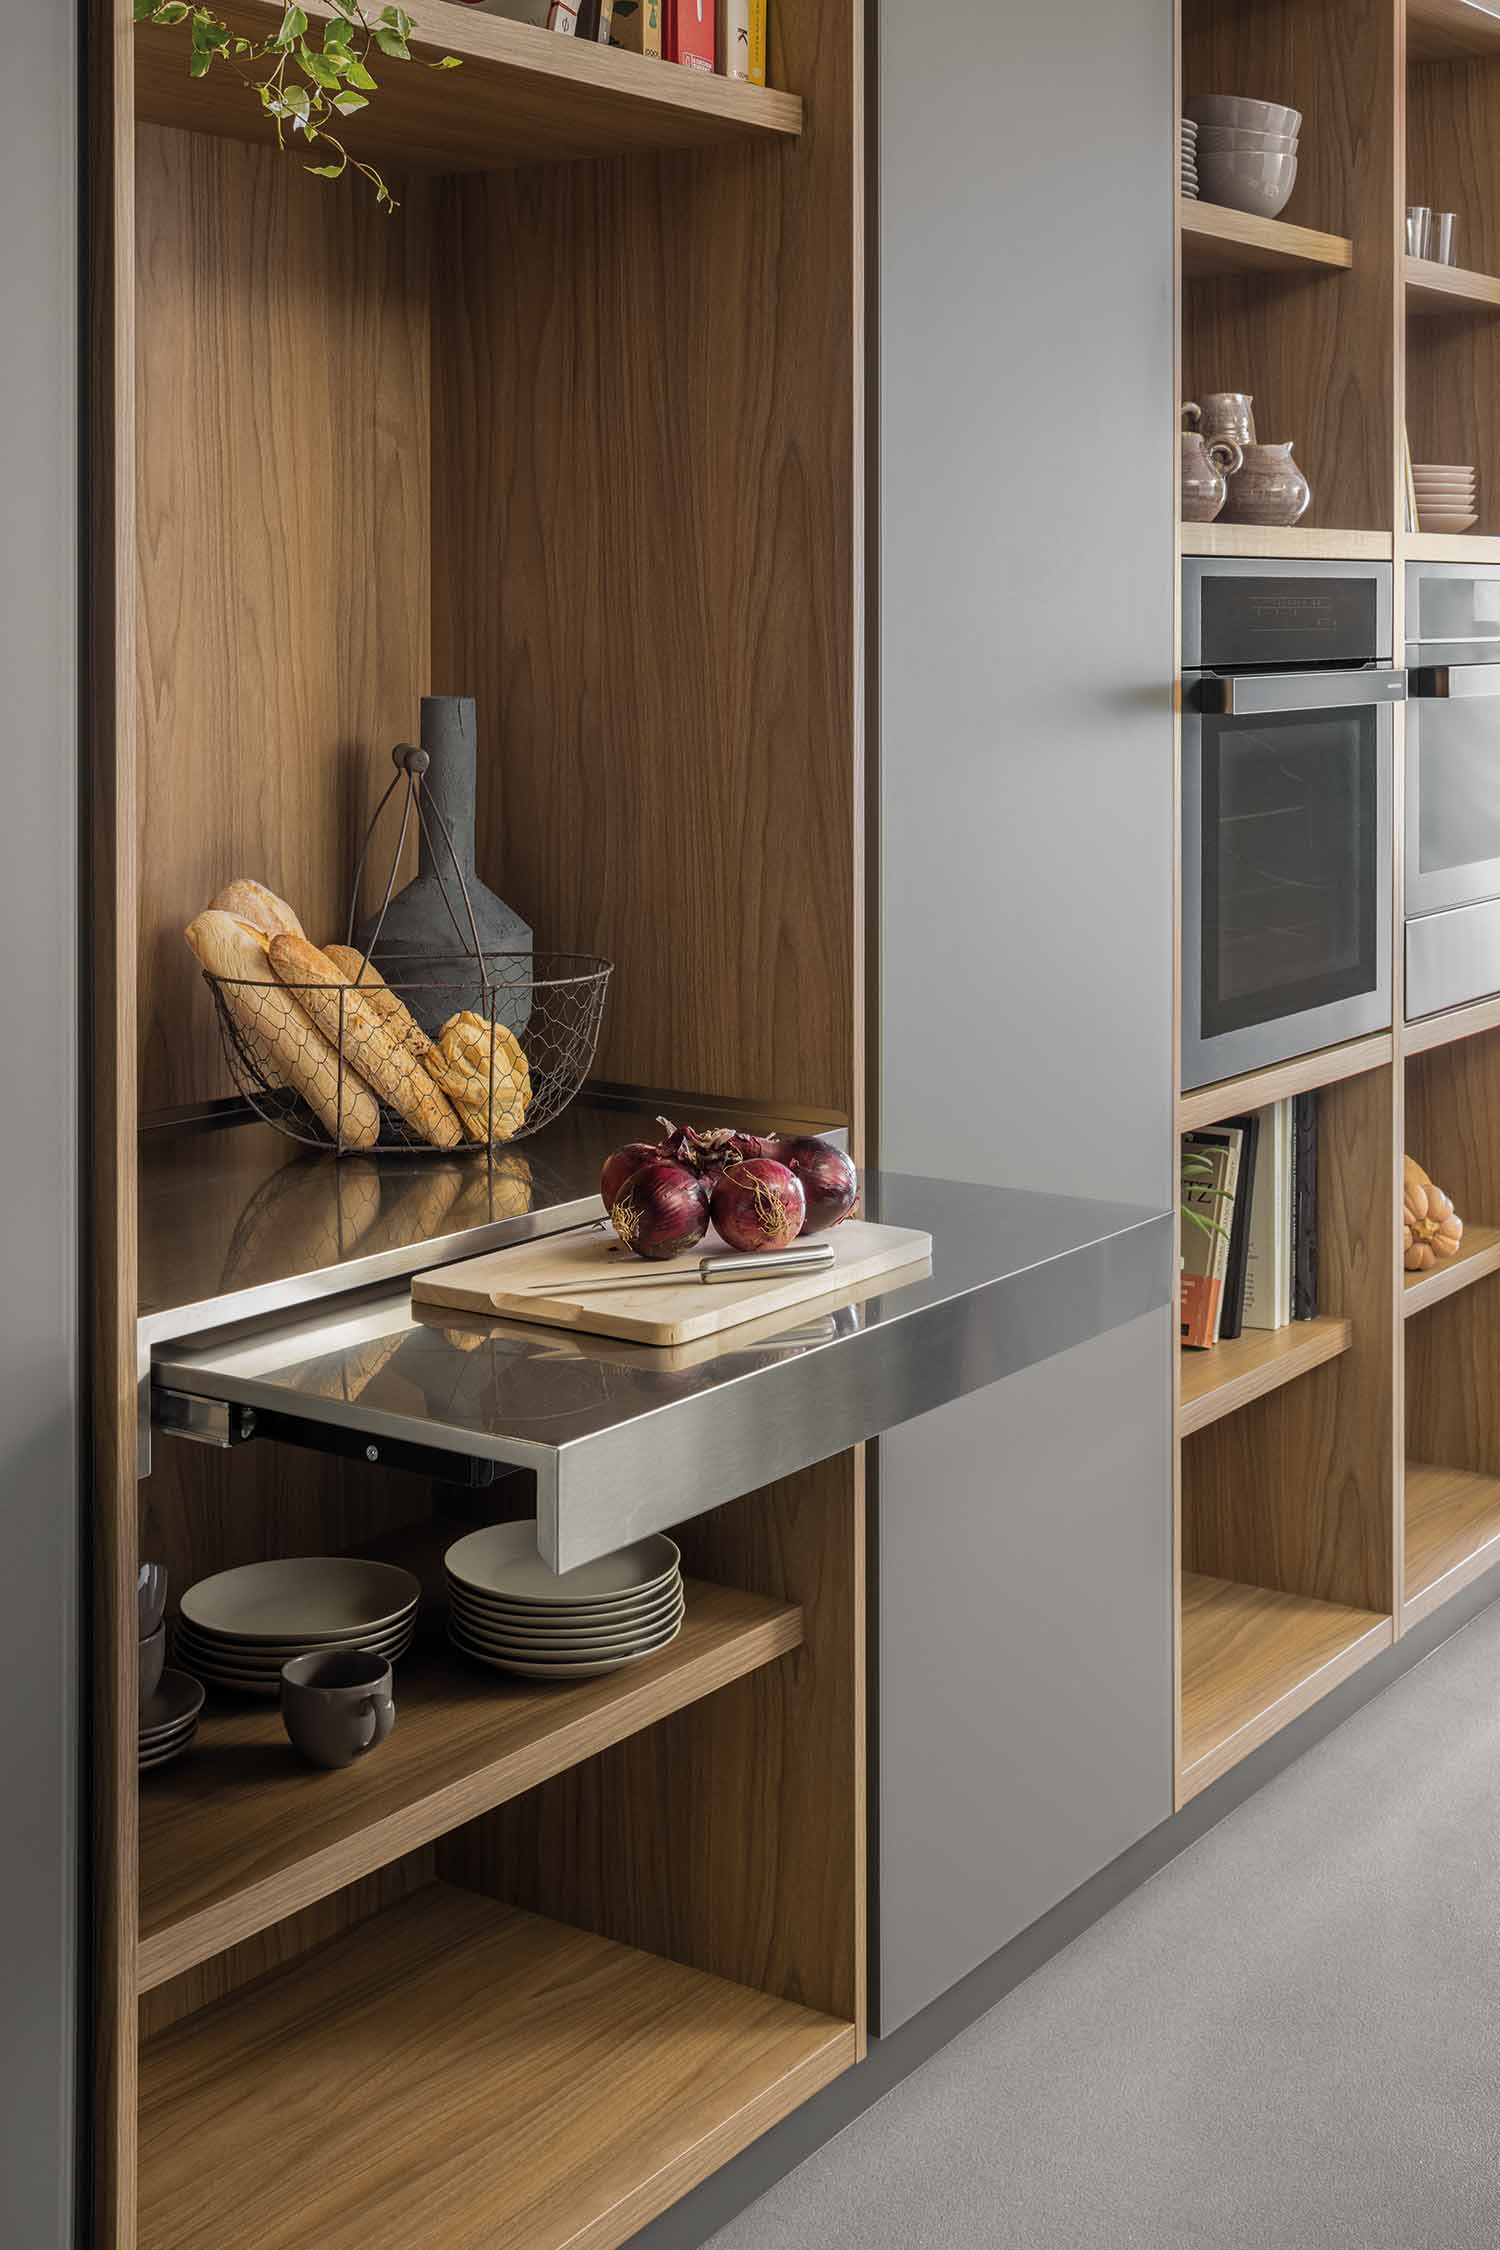 Pull-out stainless steel food preparation area from the kitchen tall unit